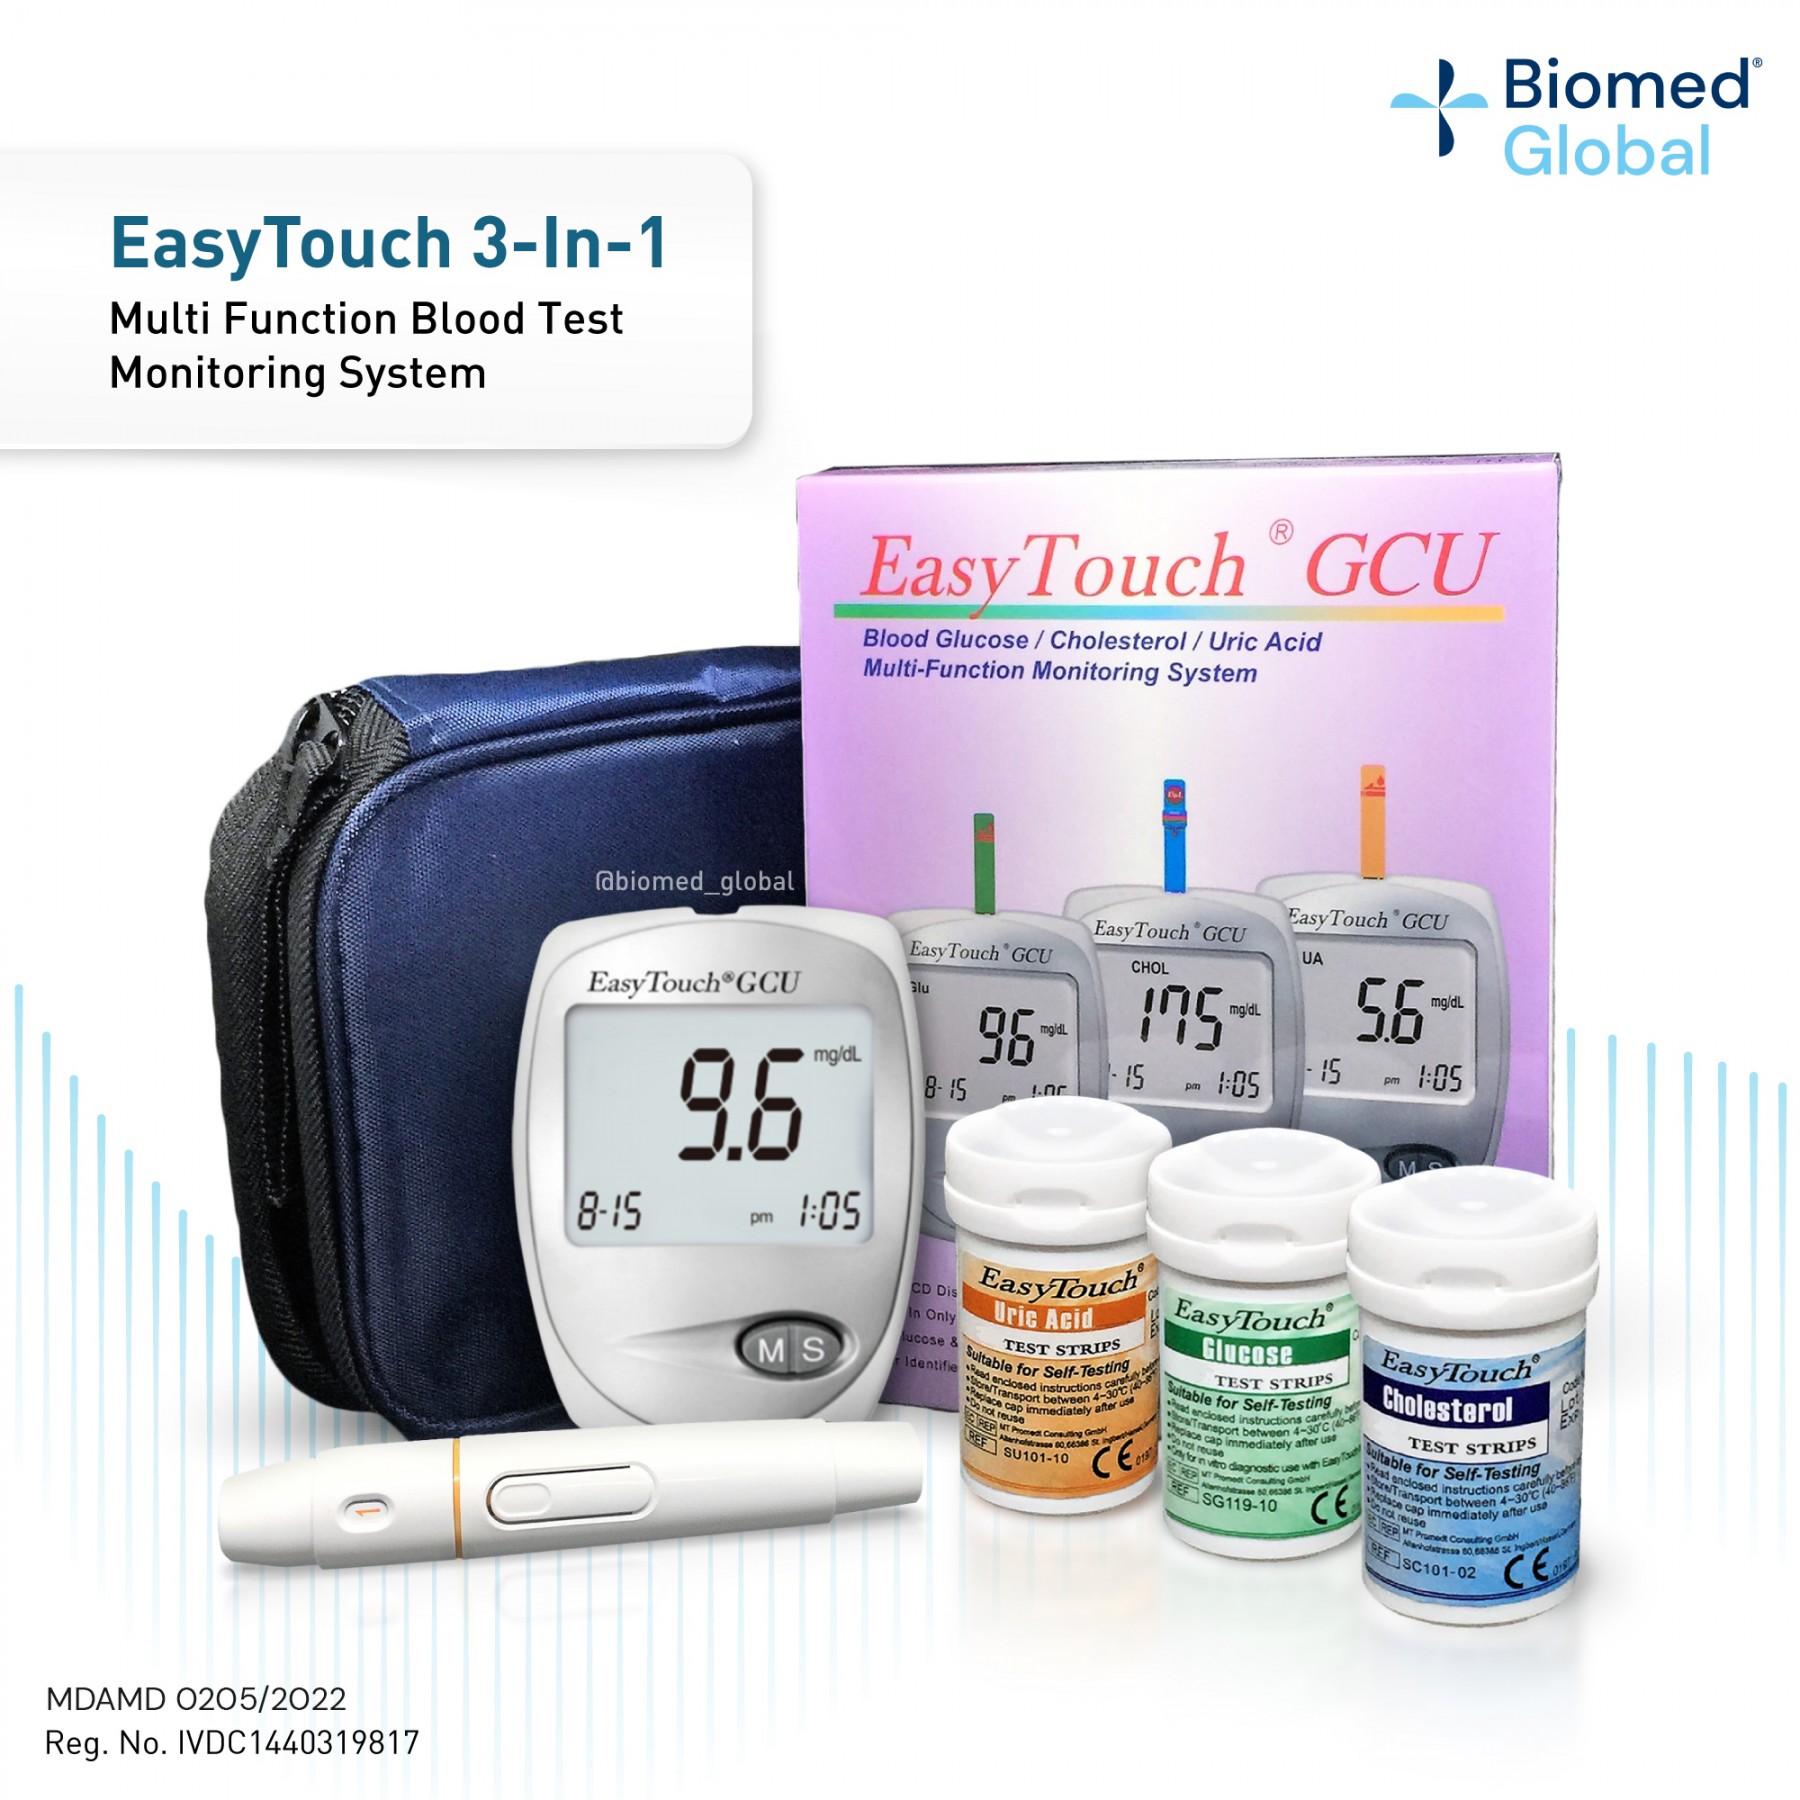 EasyTouch GCU 3-in-1 Blood Glucose, Cholesterol and Uric Acid Meter Complete Kit